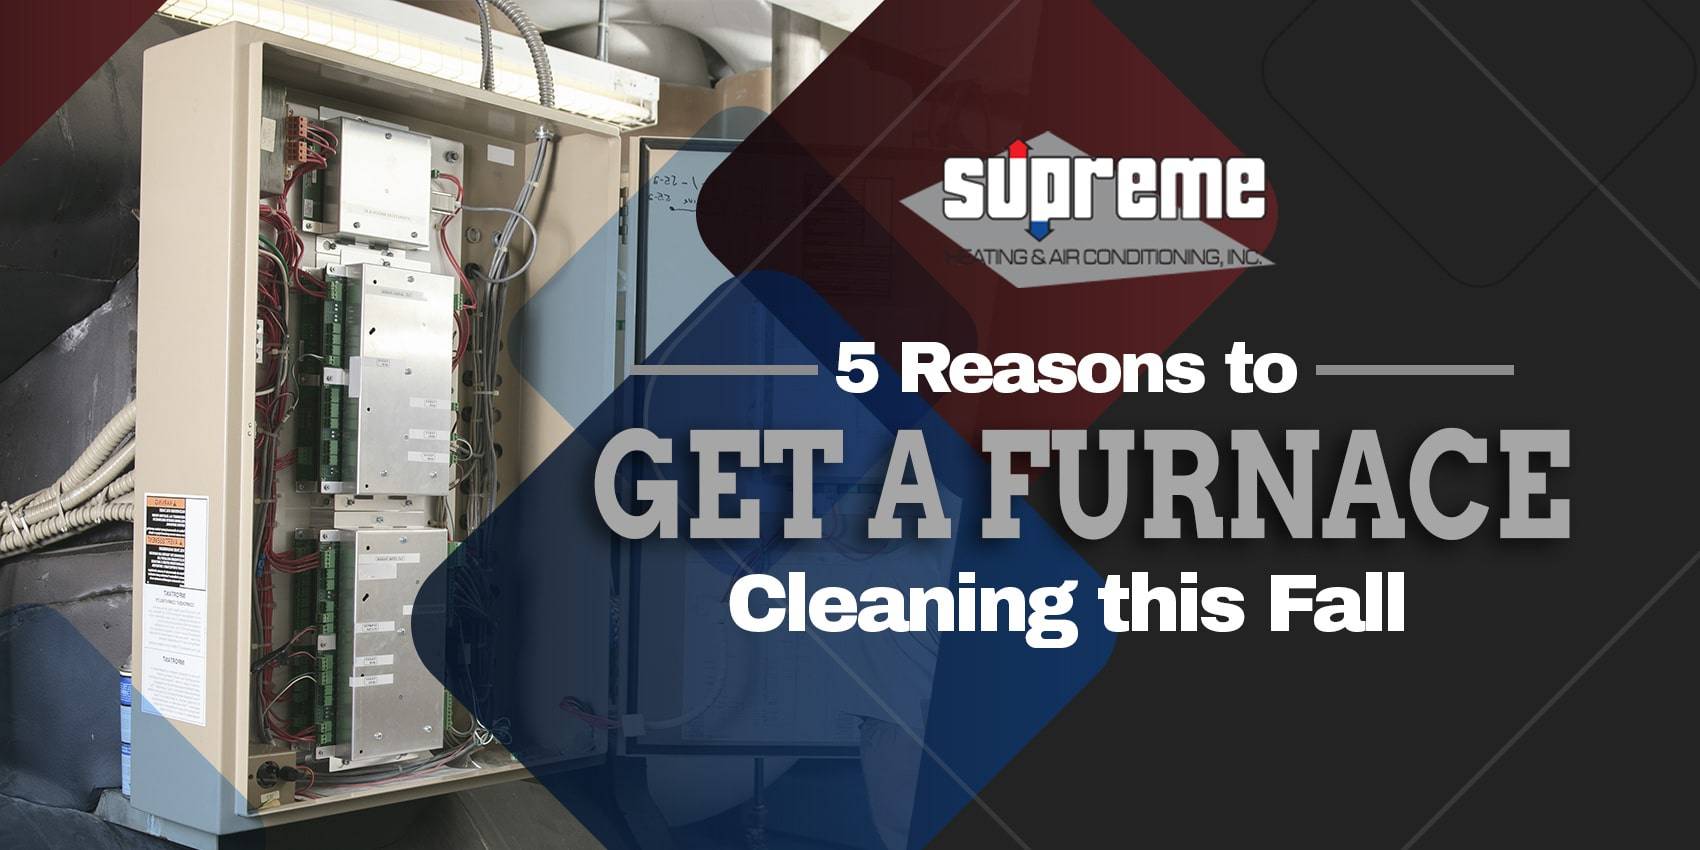 5 Reasons to Get a Furnace Cleaning this Fall